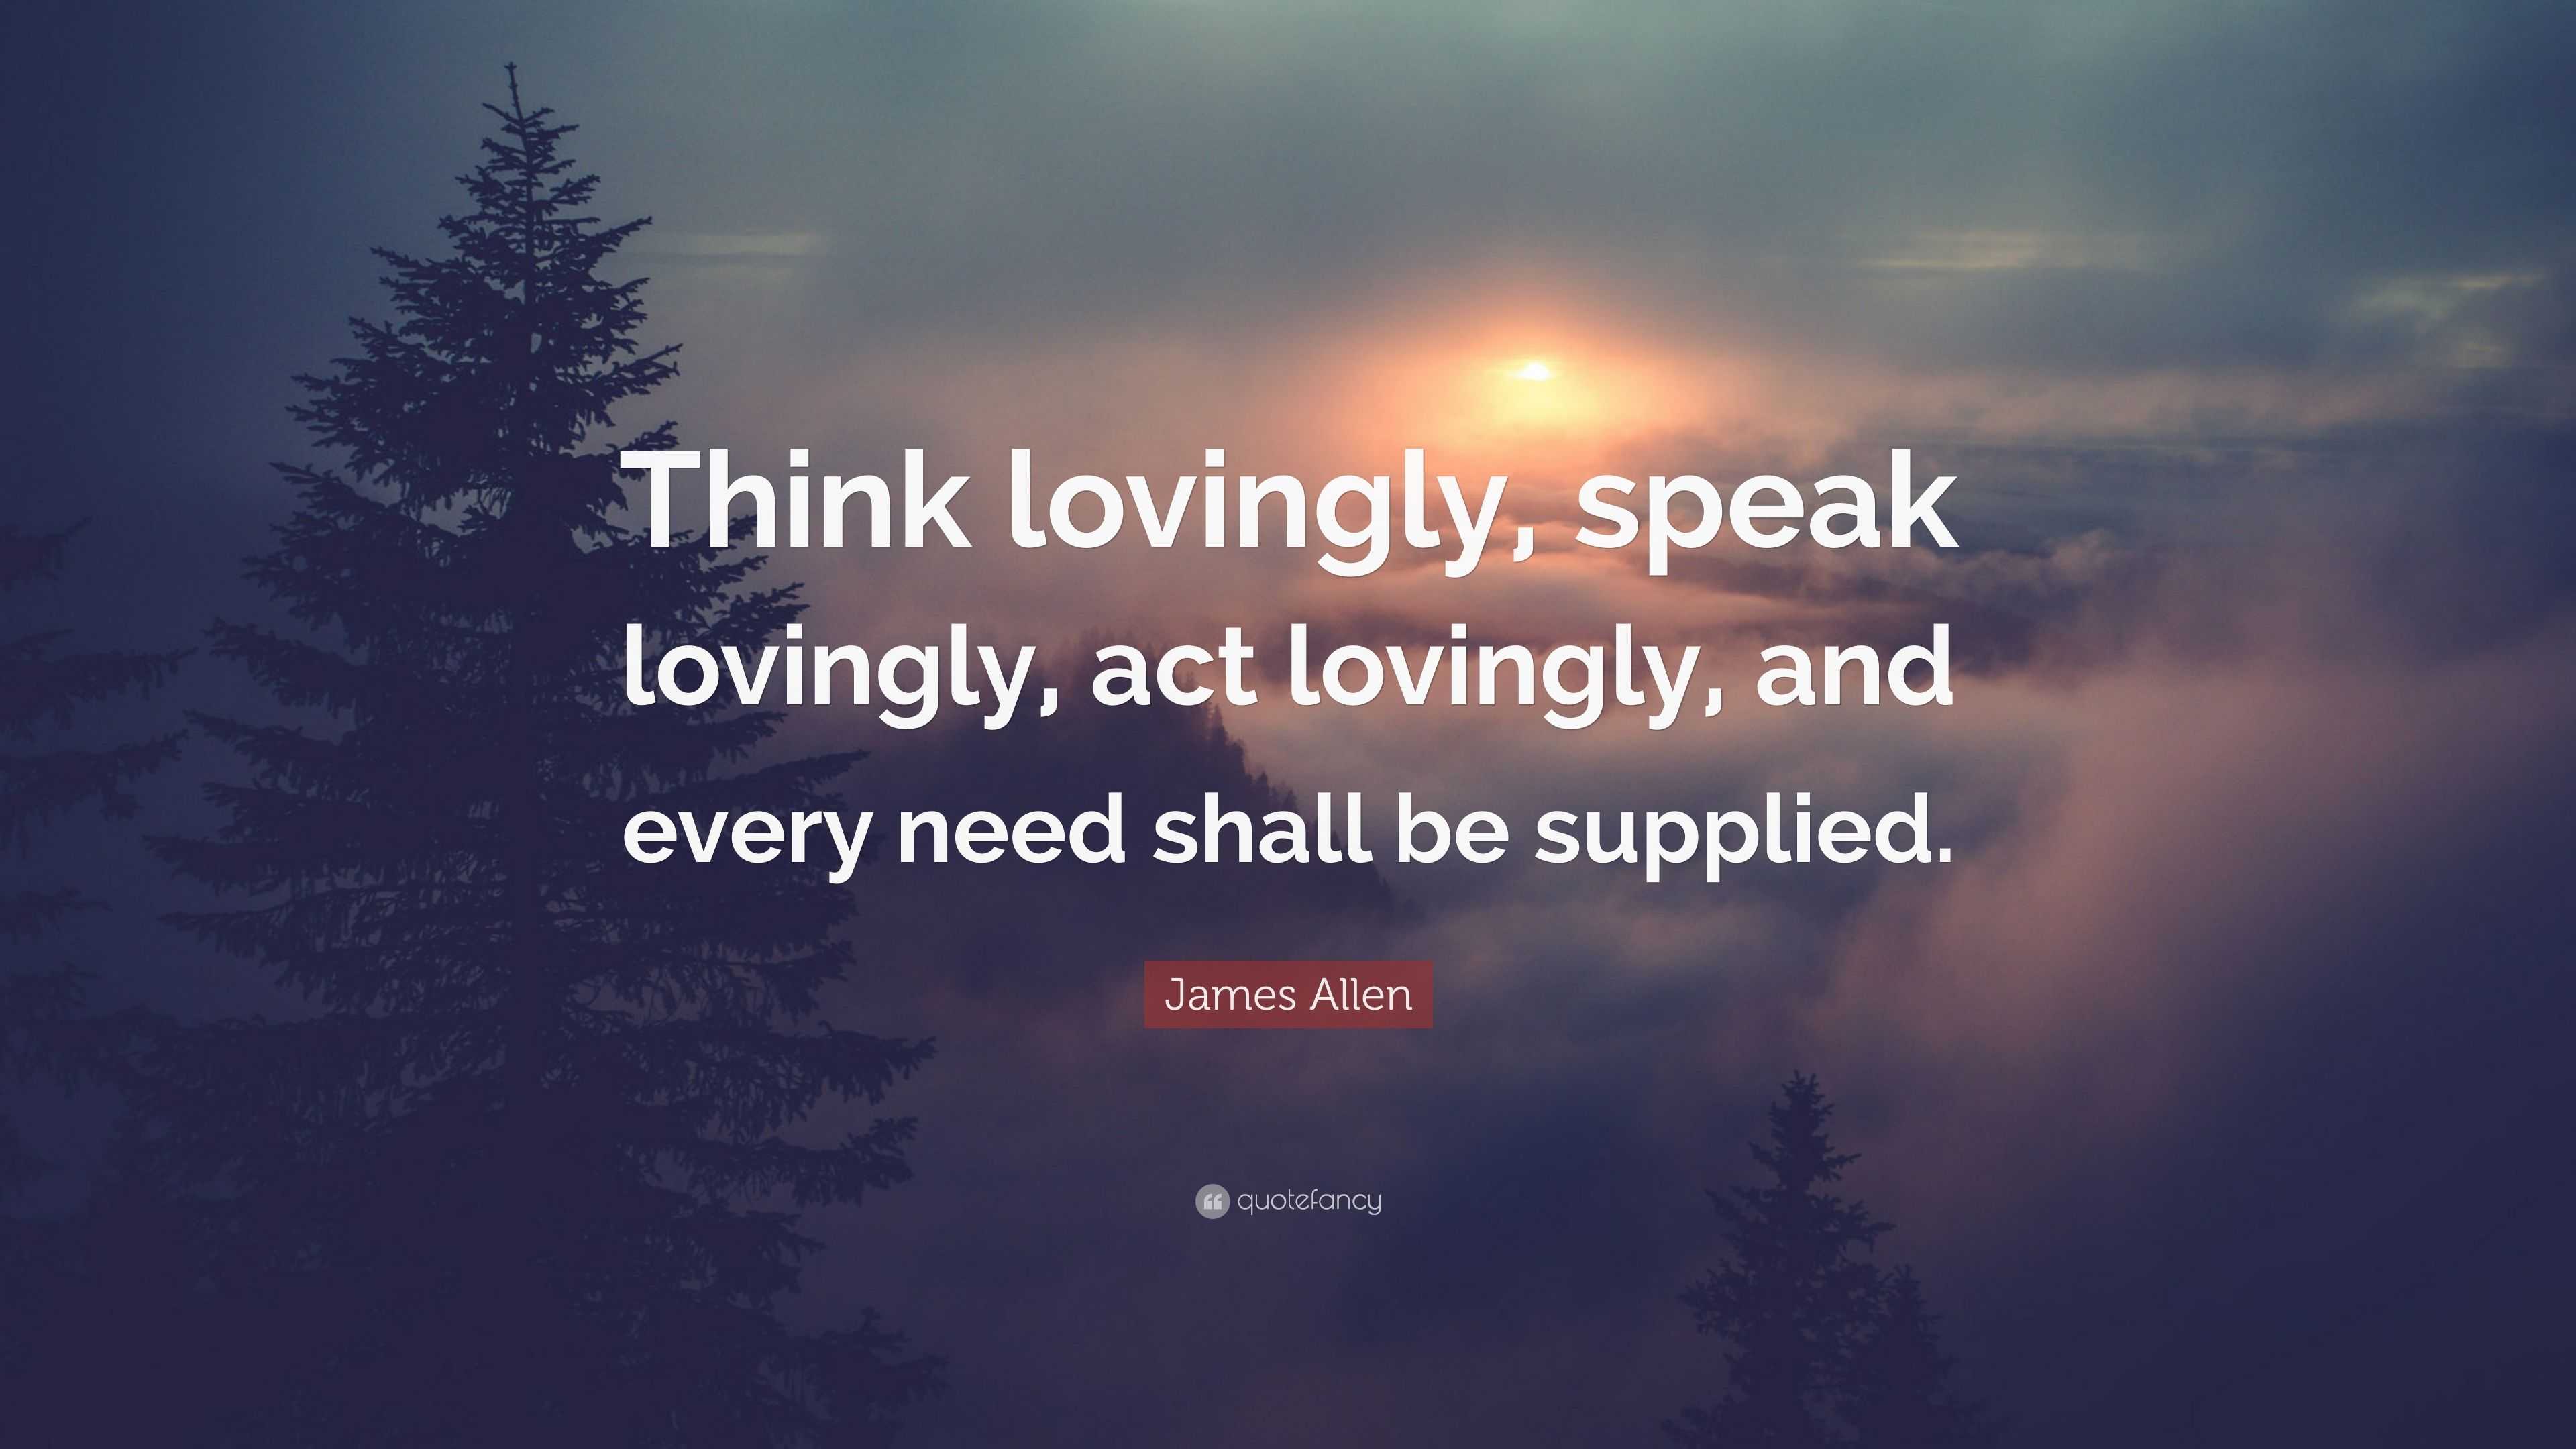 James Allen Quote: “Think lovingly, speak lovingly, act lovingly, and ...